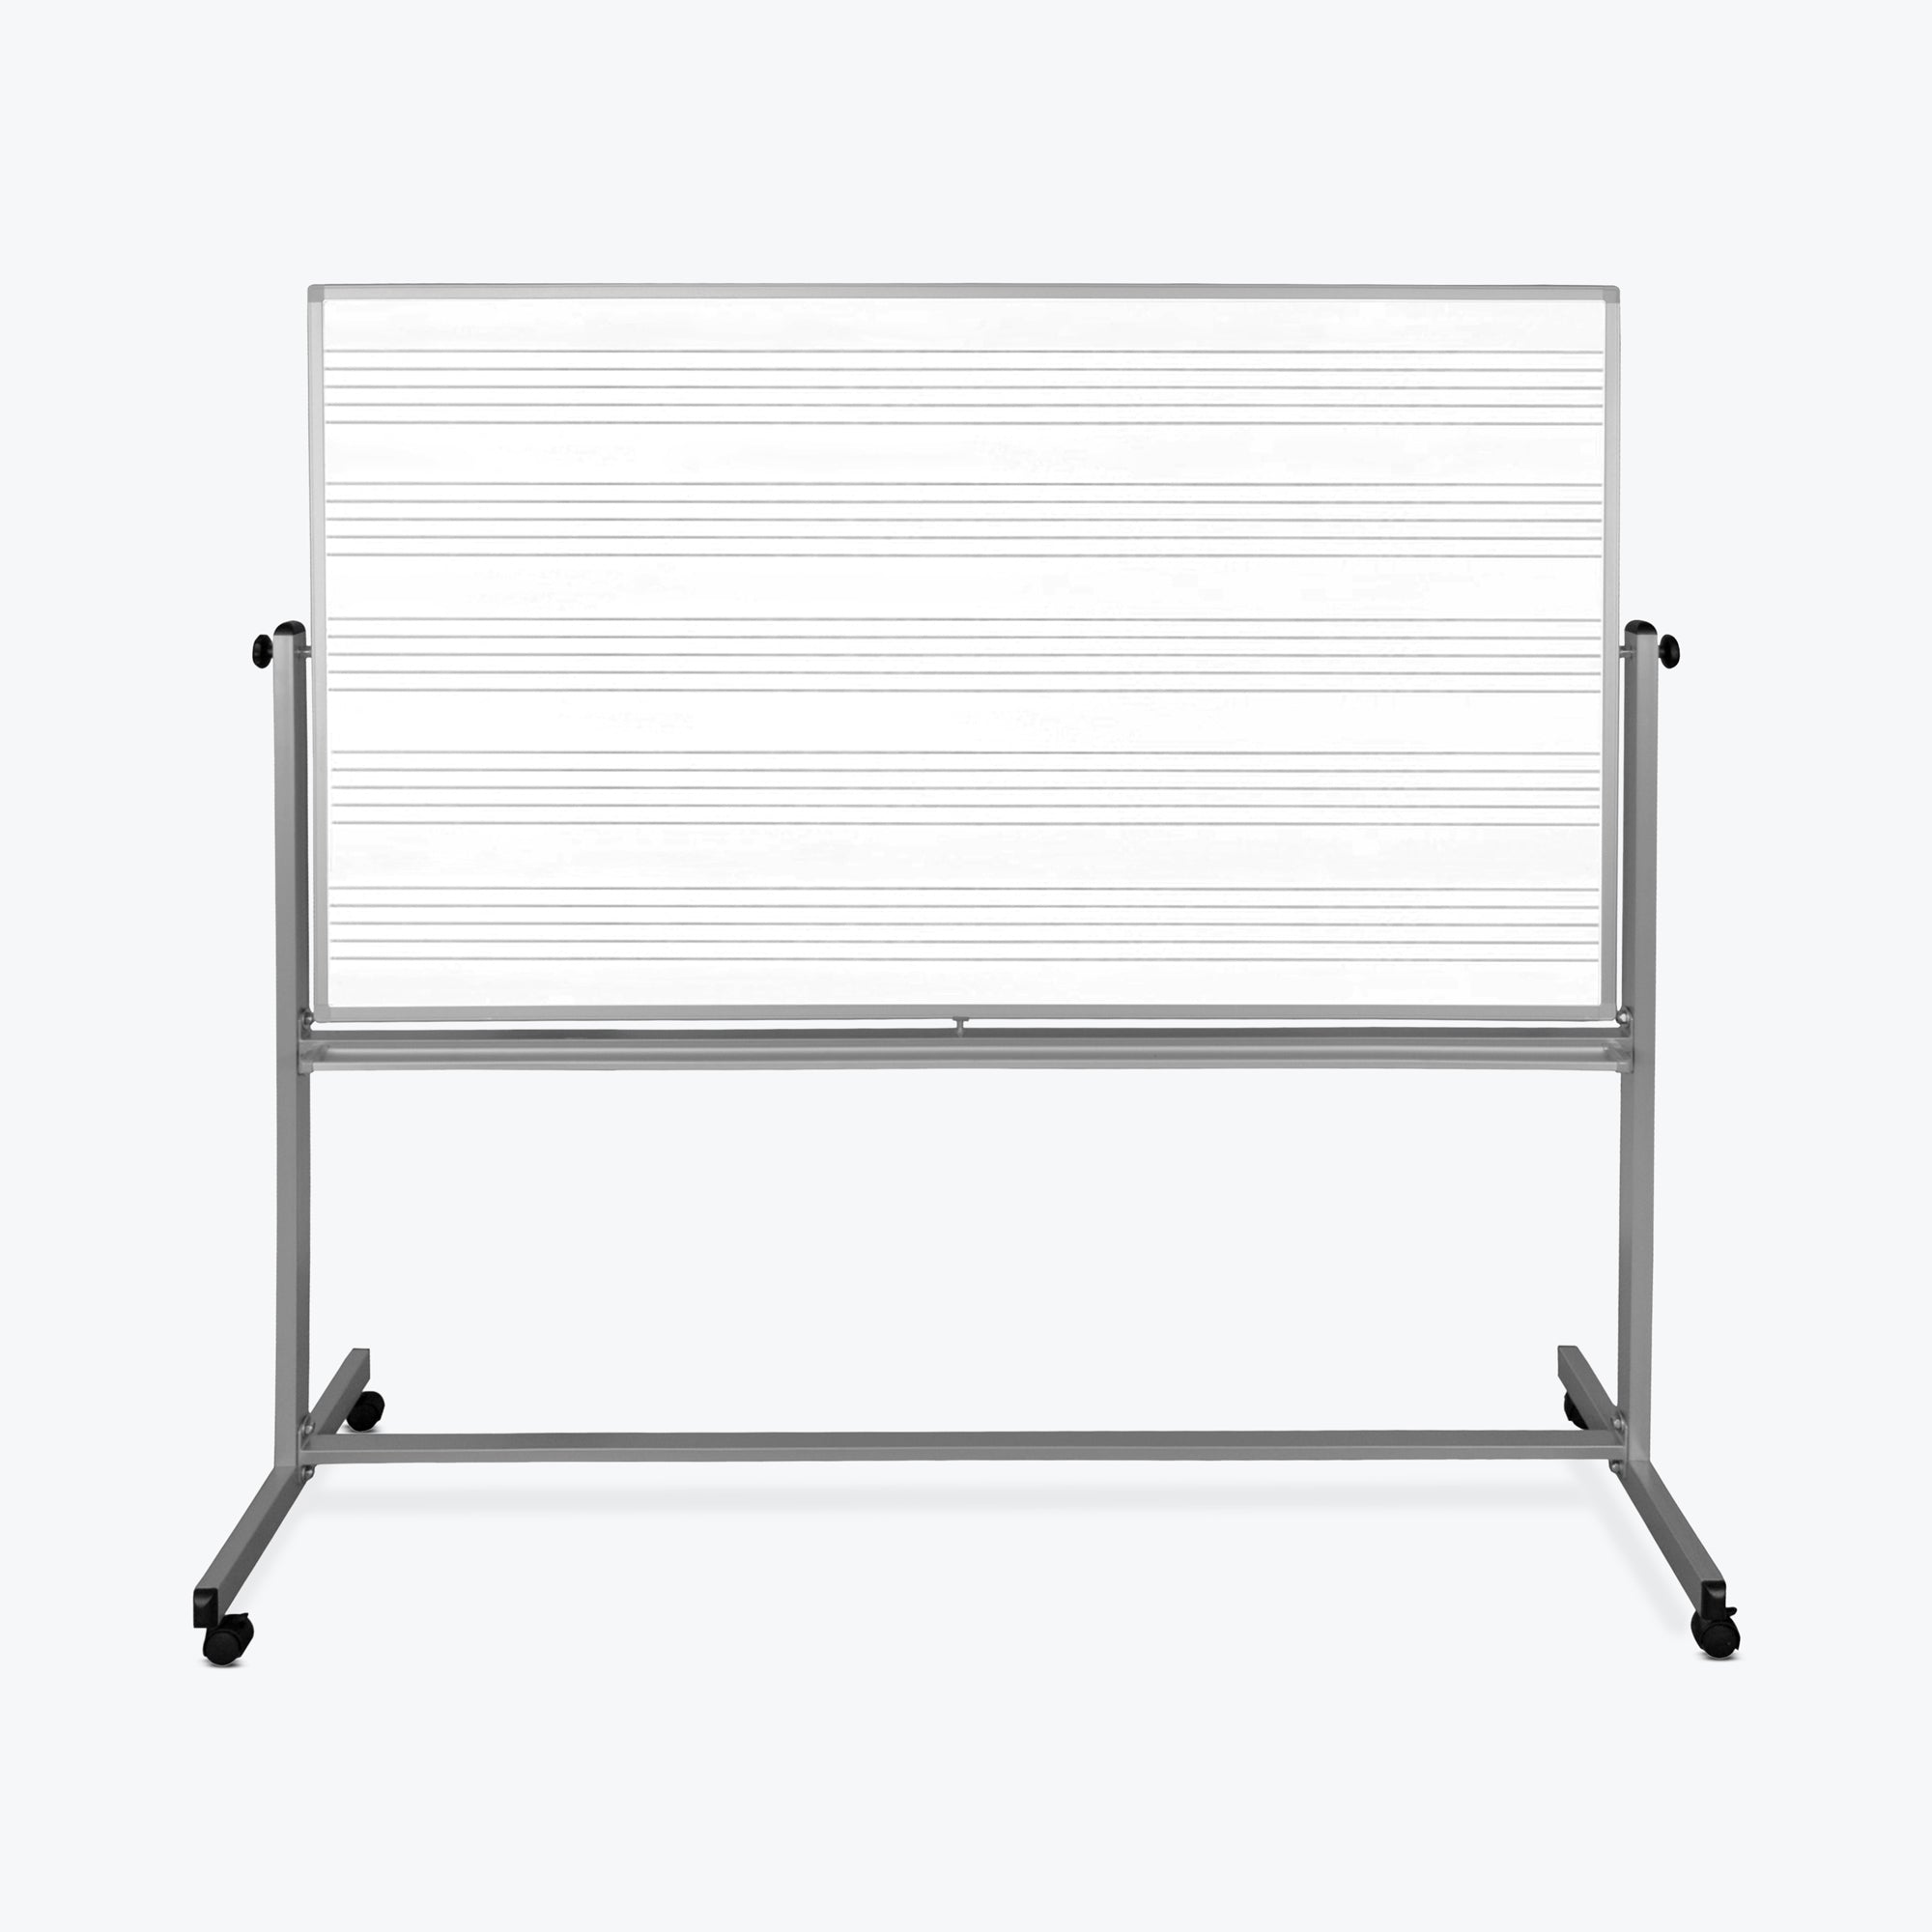 Luxor 72" x 48" Reversible Magnetic Mobile Music Whiteboard 74.5"W x 23"D x 72"H (Silver/White) - MB7248MM